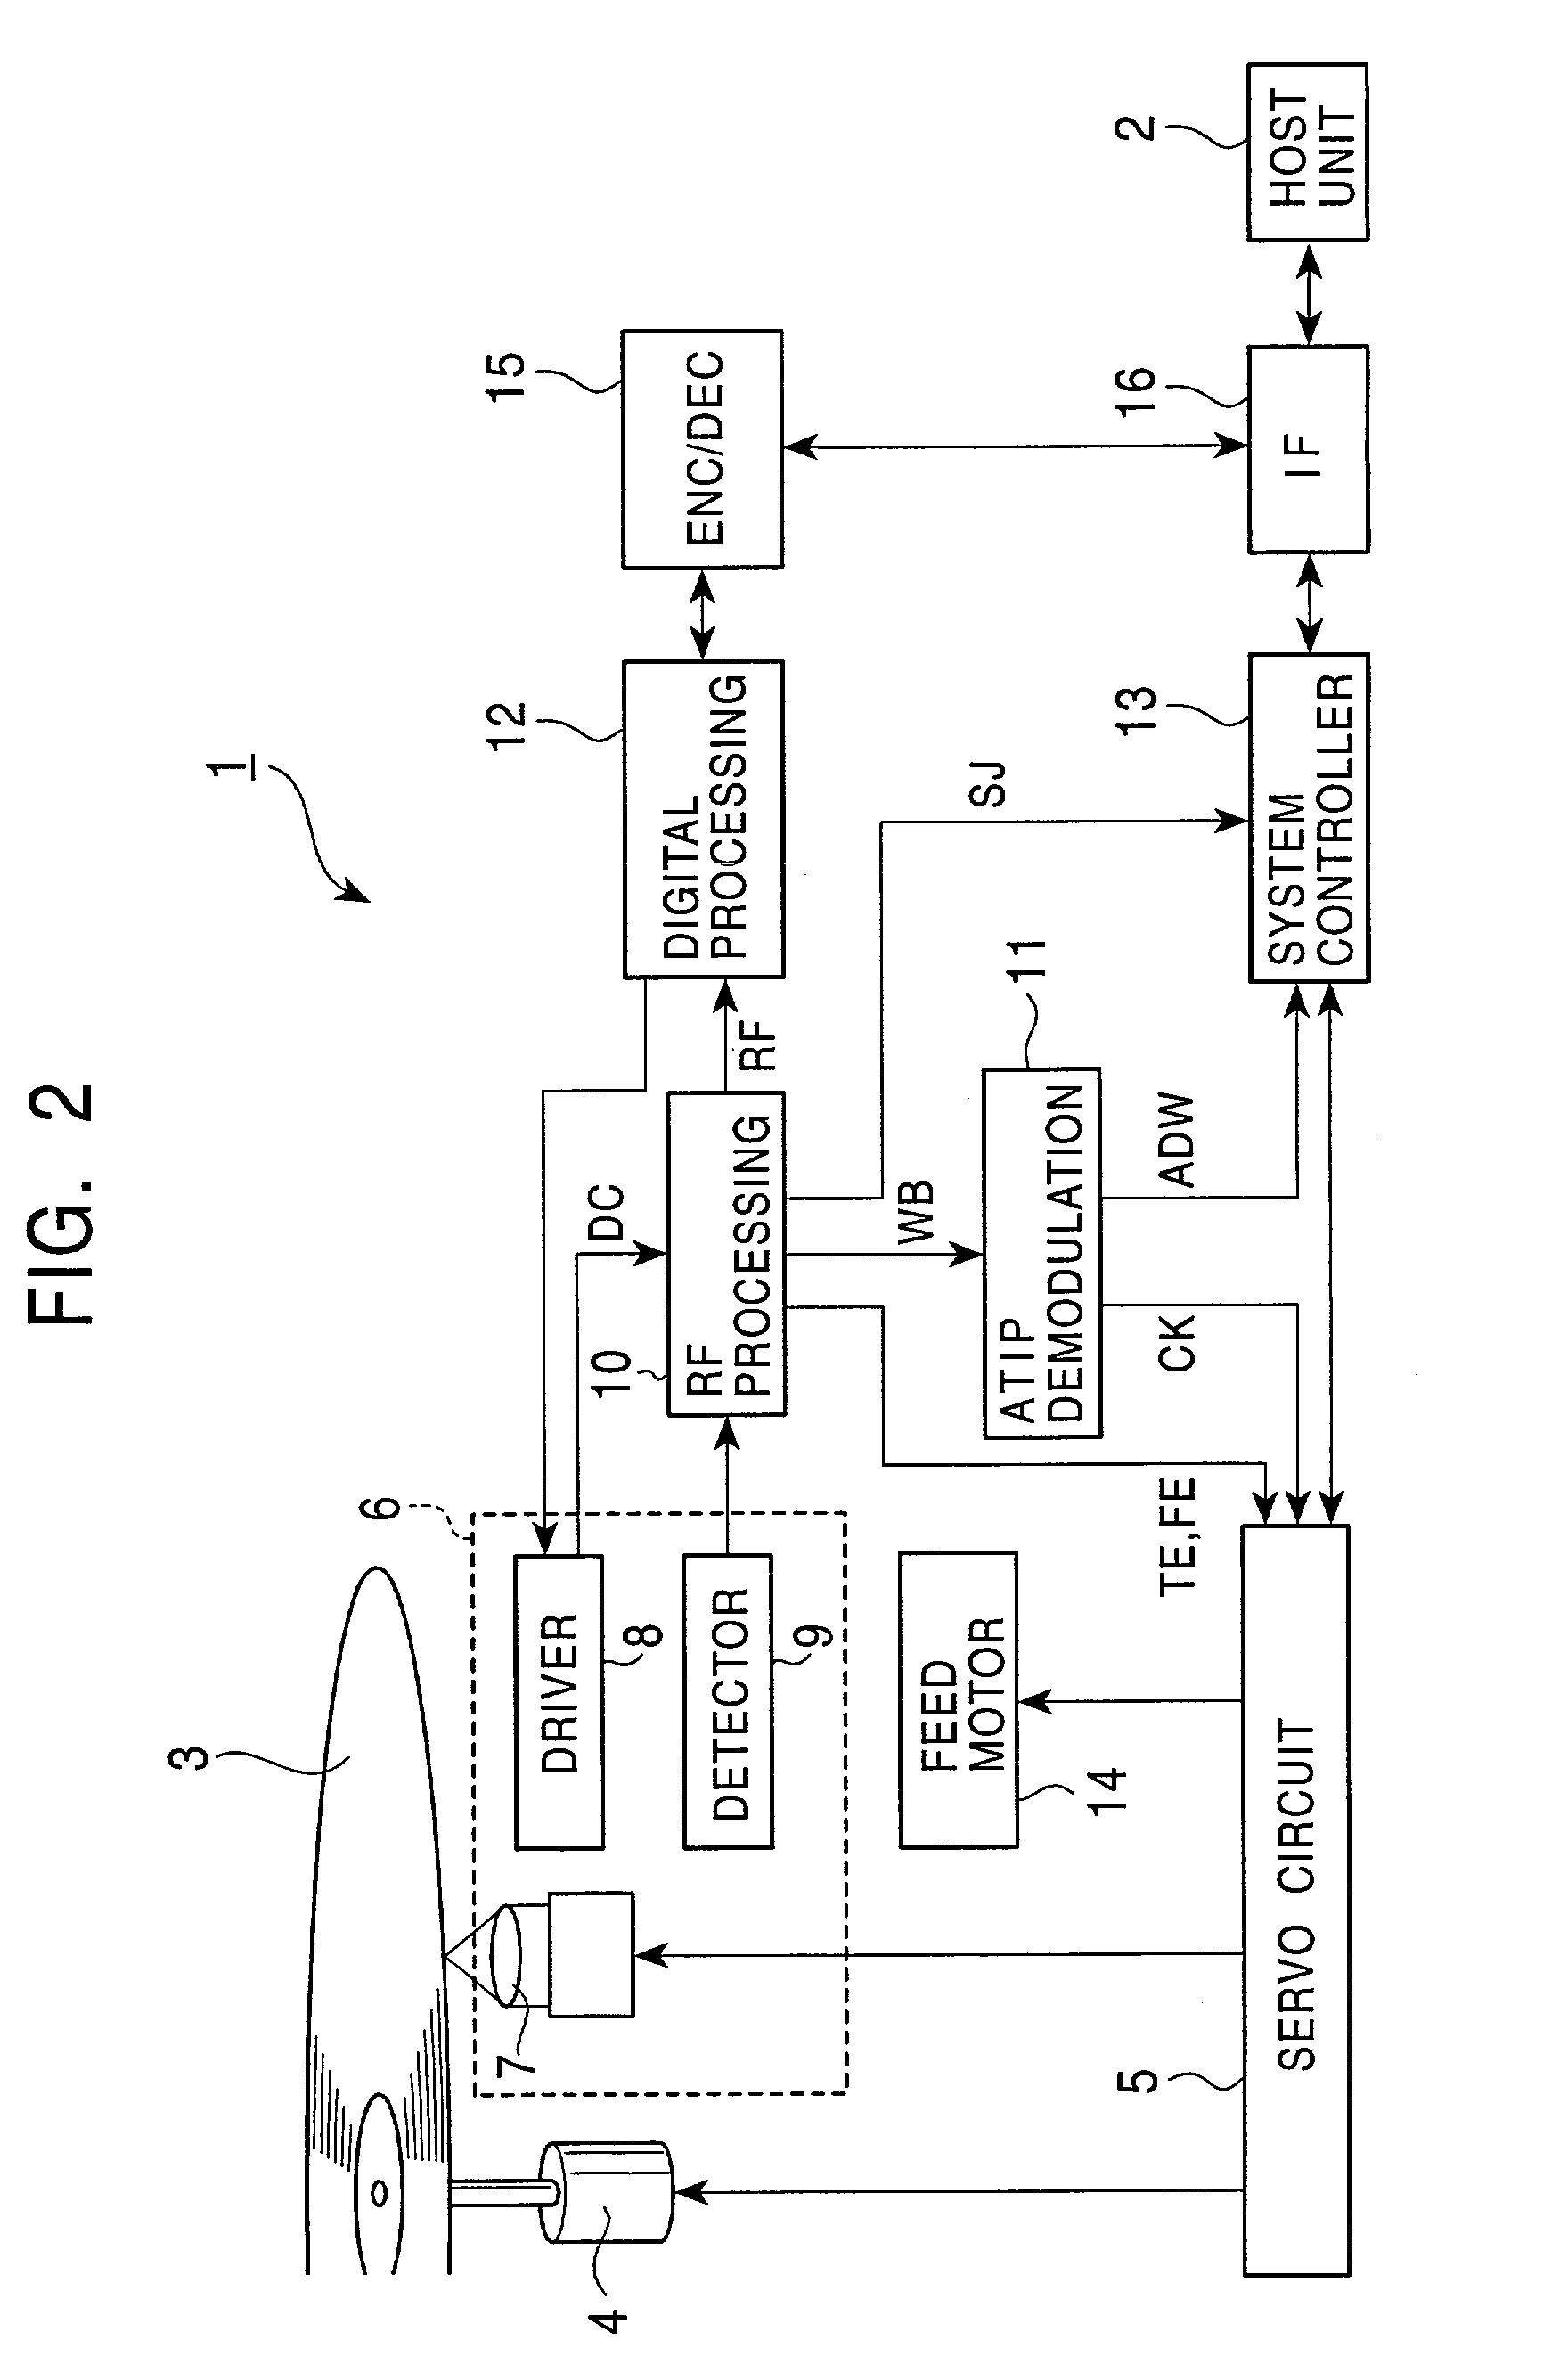 Optical disc device and control method using preceding sub-beam to detect a disc defect